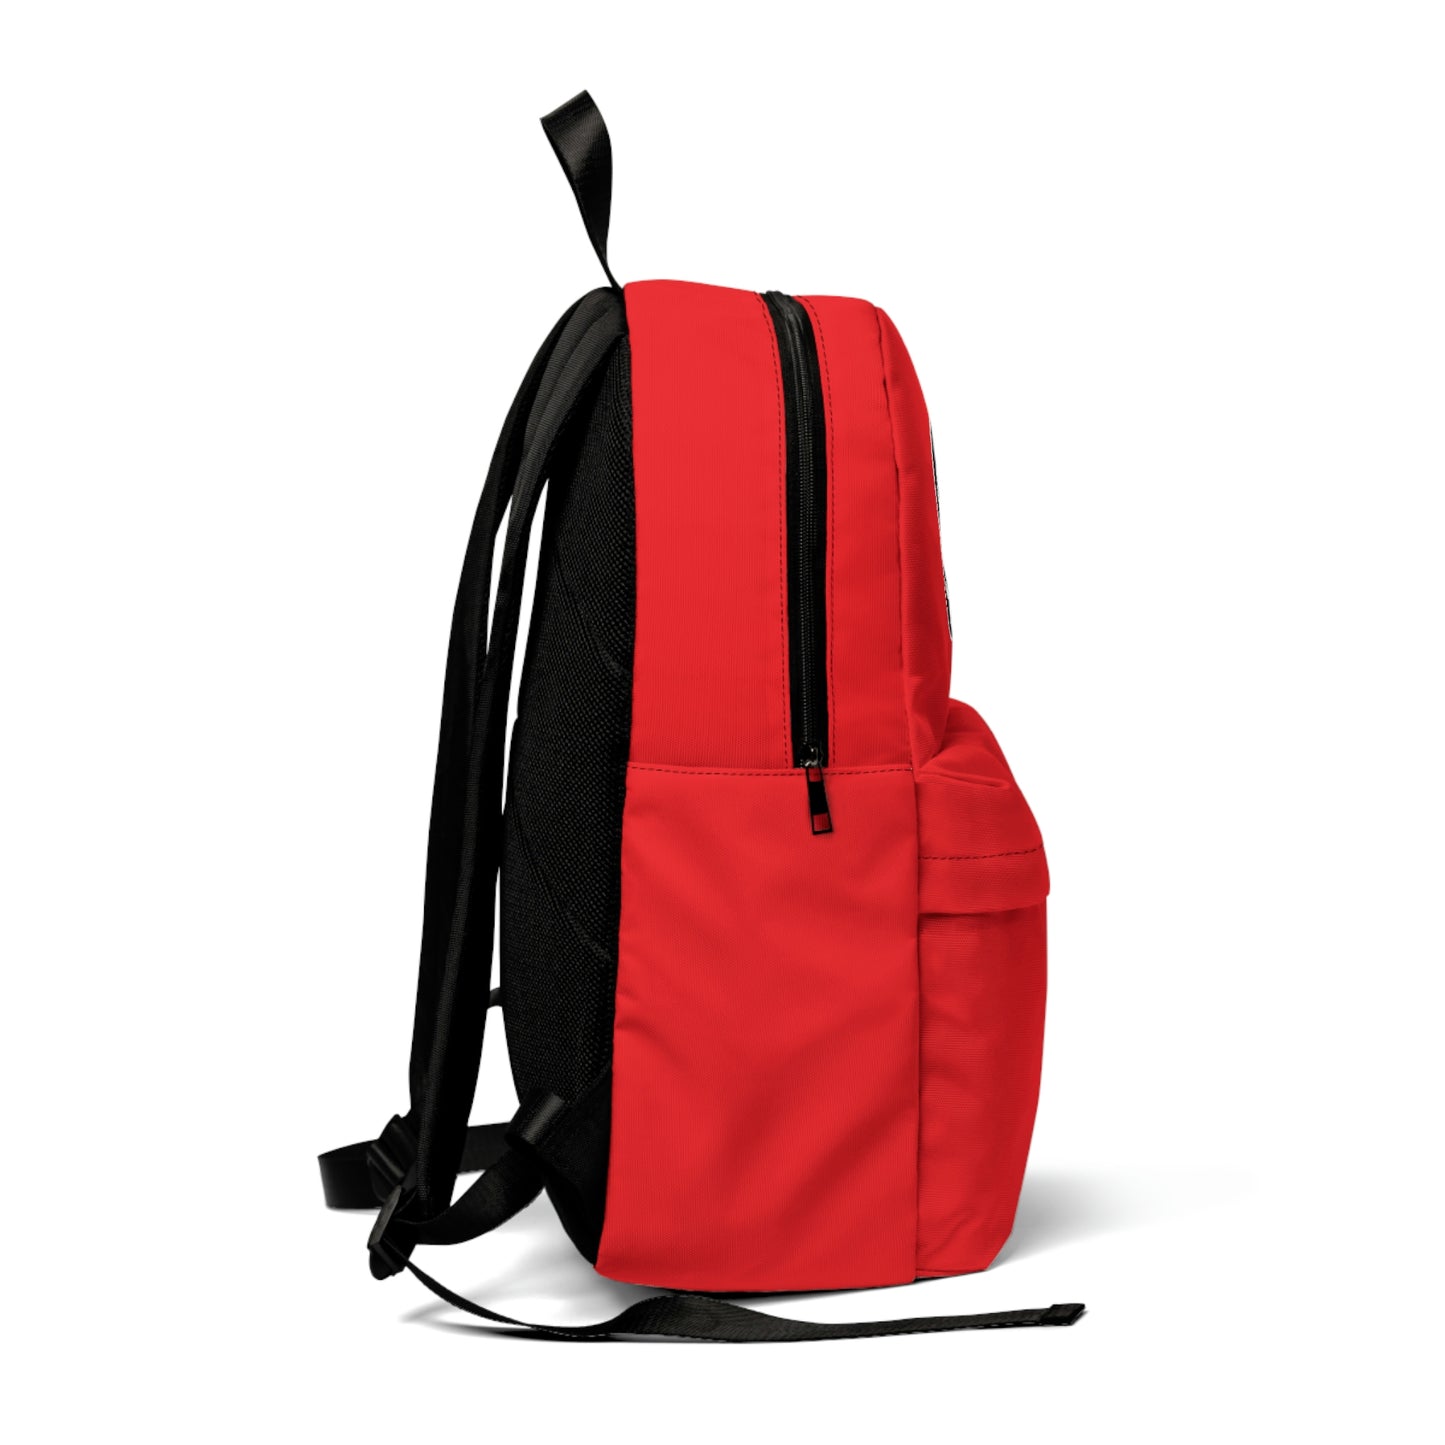 Ape Nation Red Backpack (Trait Inspired)